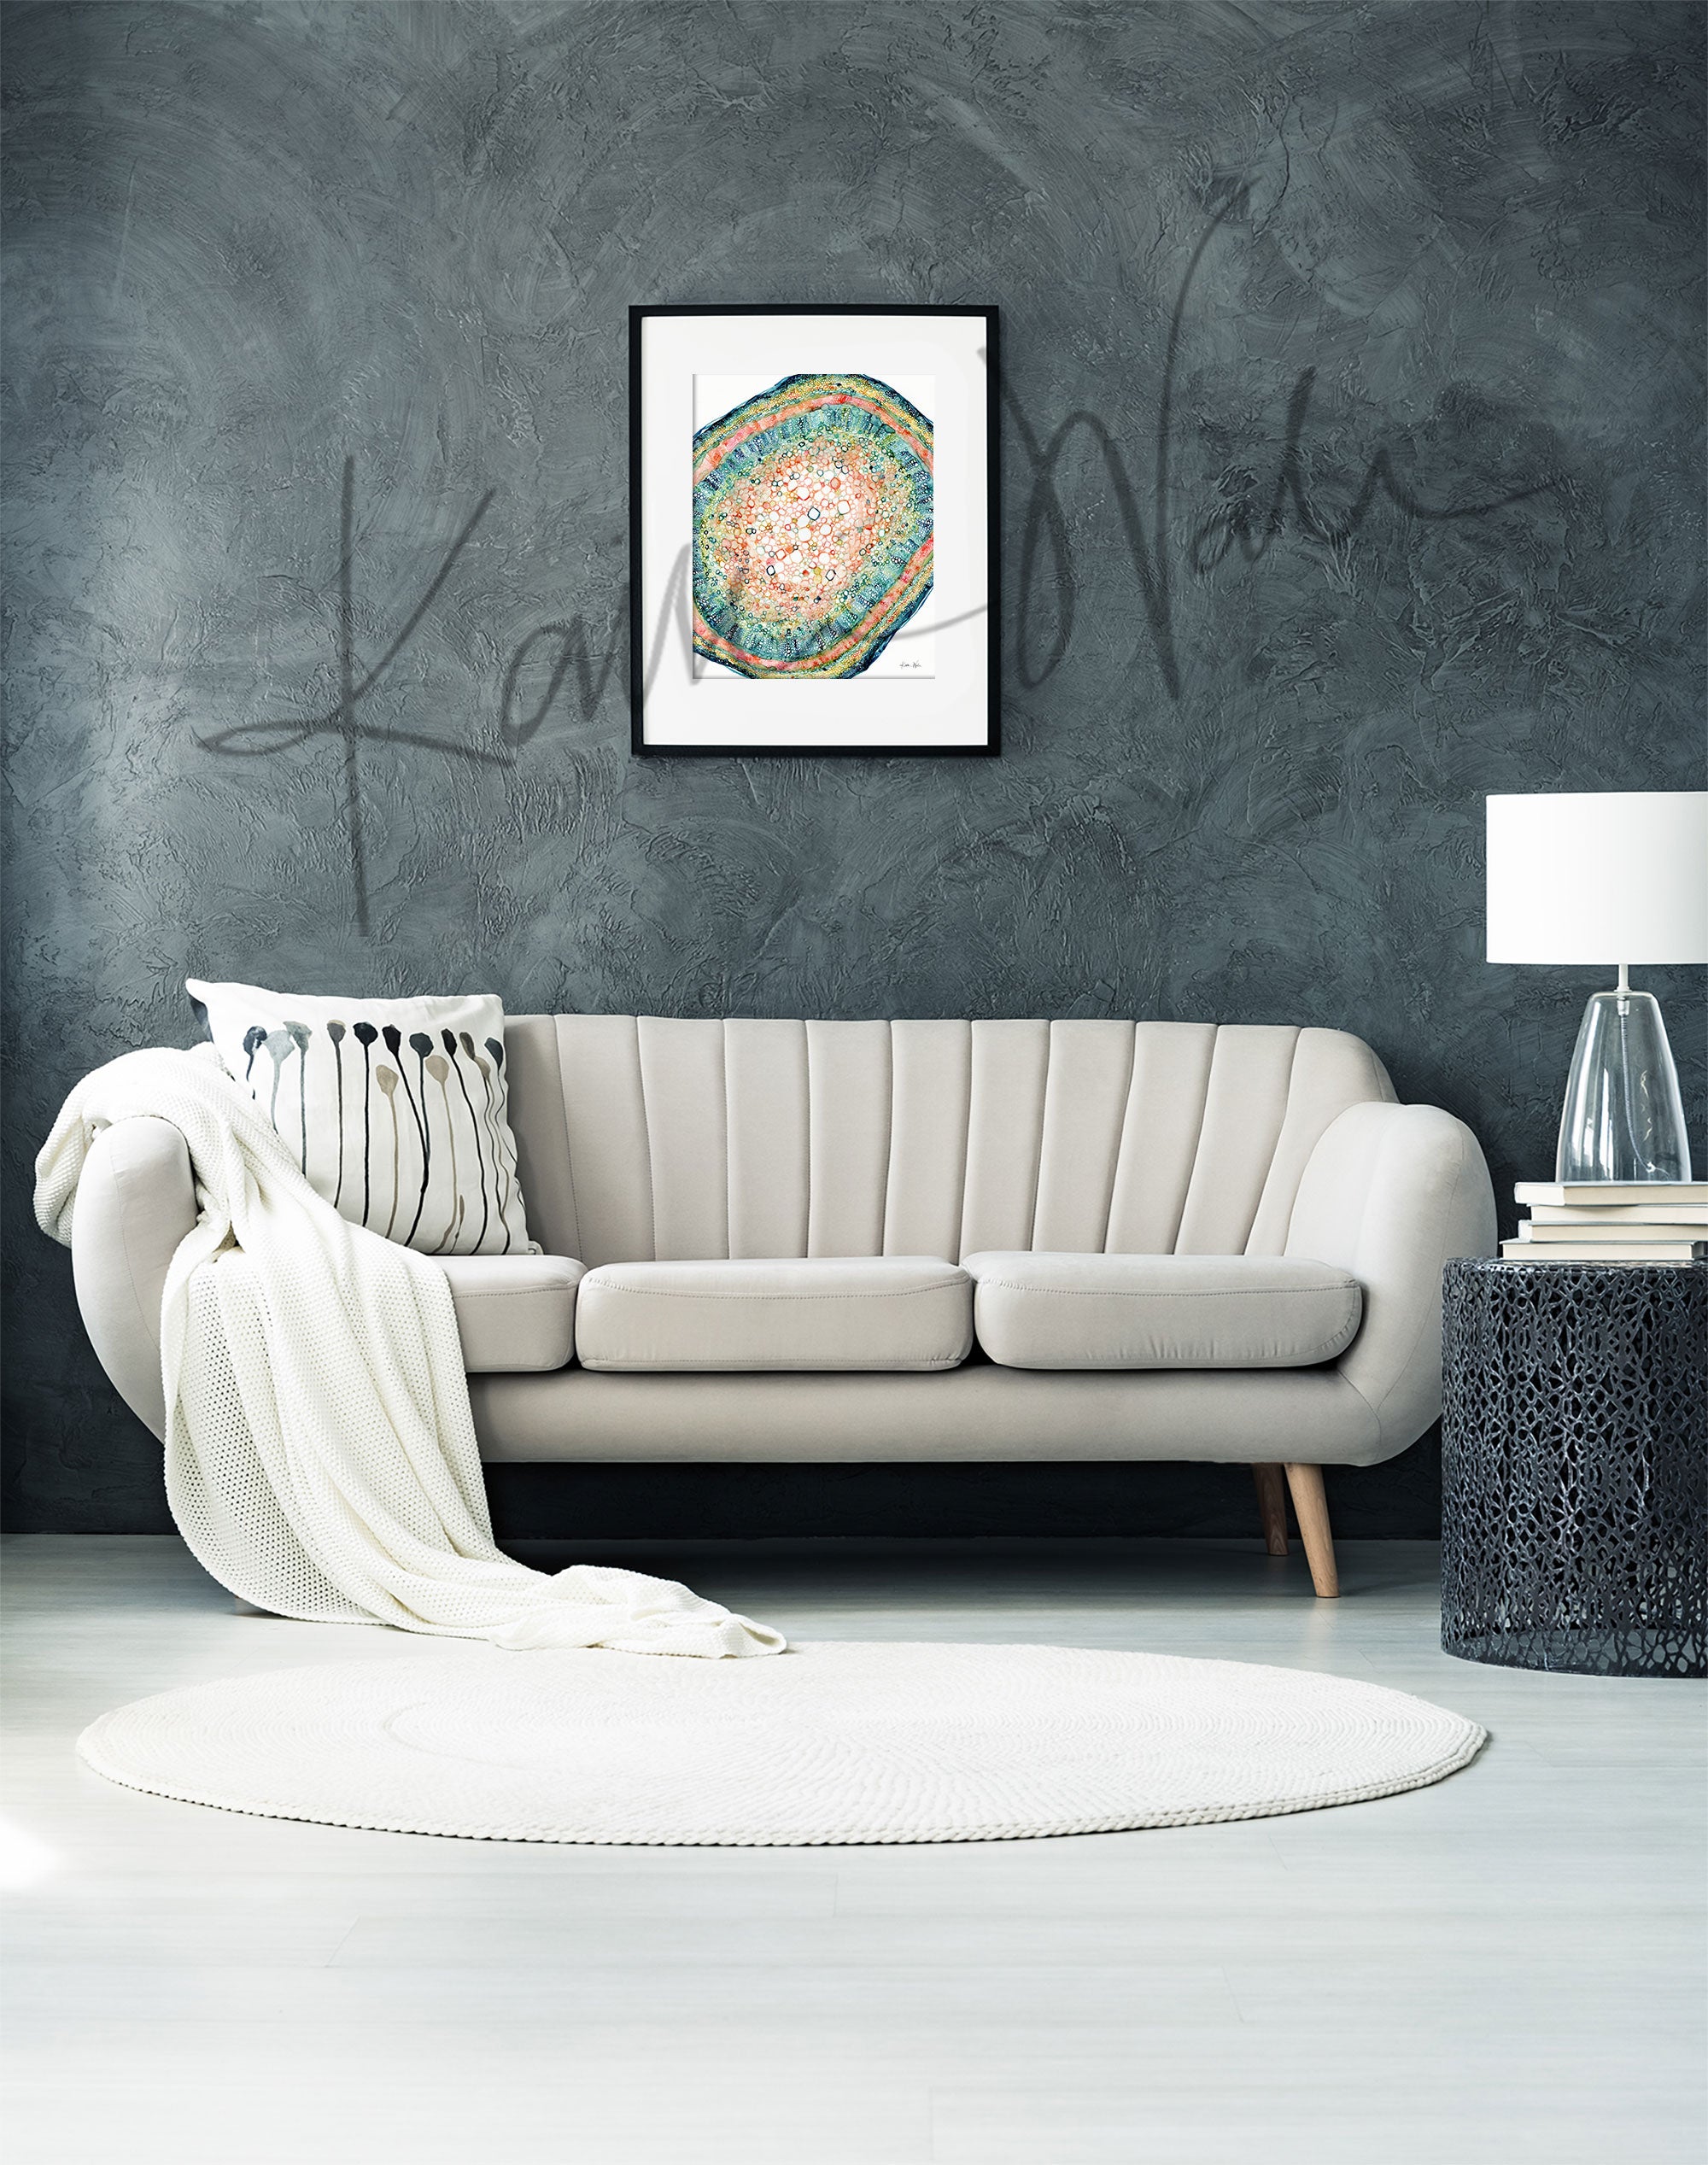 Framed watercolor painting of the histology of a plant leaf stem. The painting is hanging over a white couch.